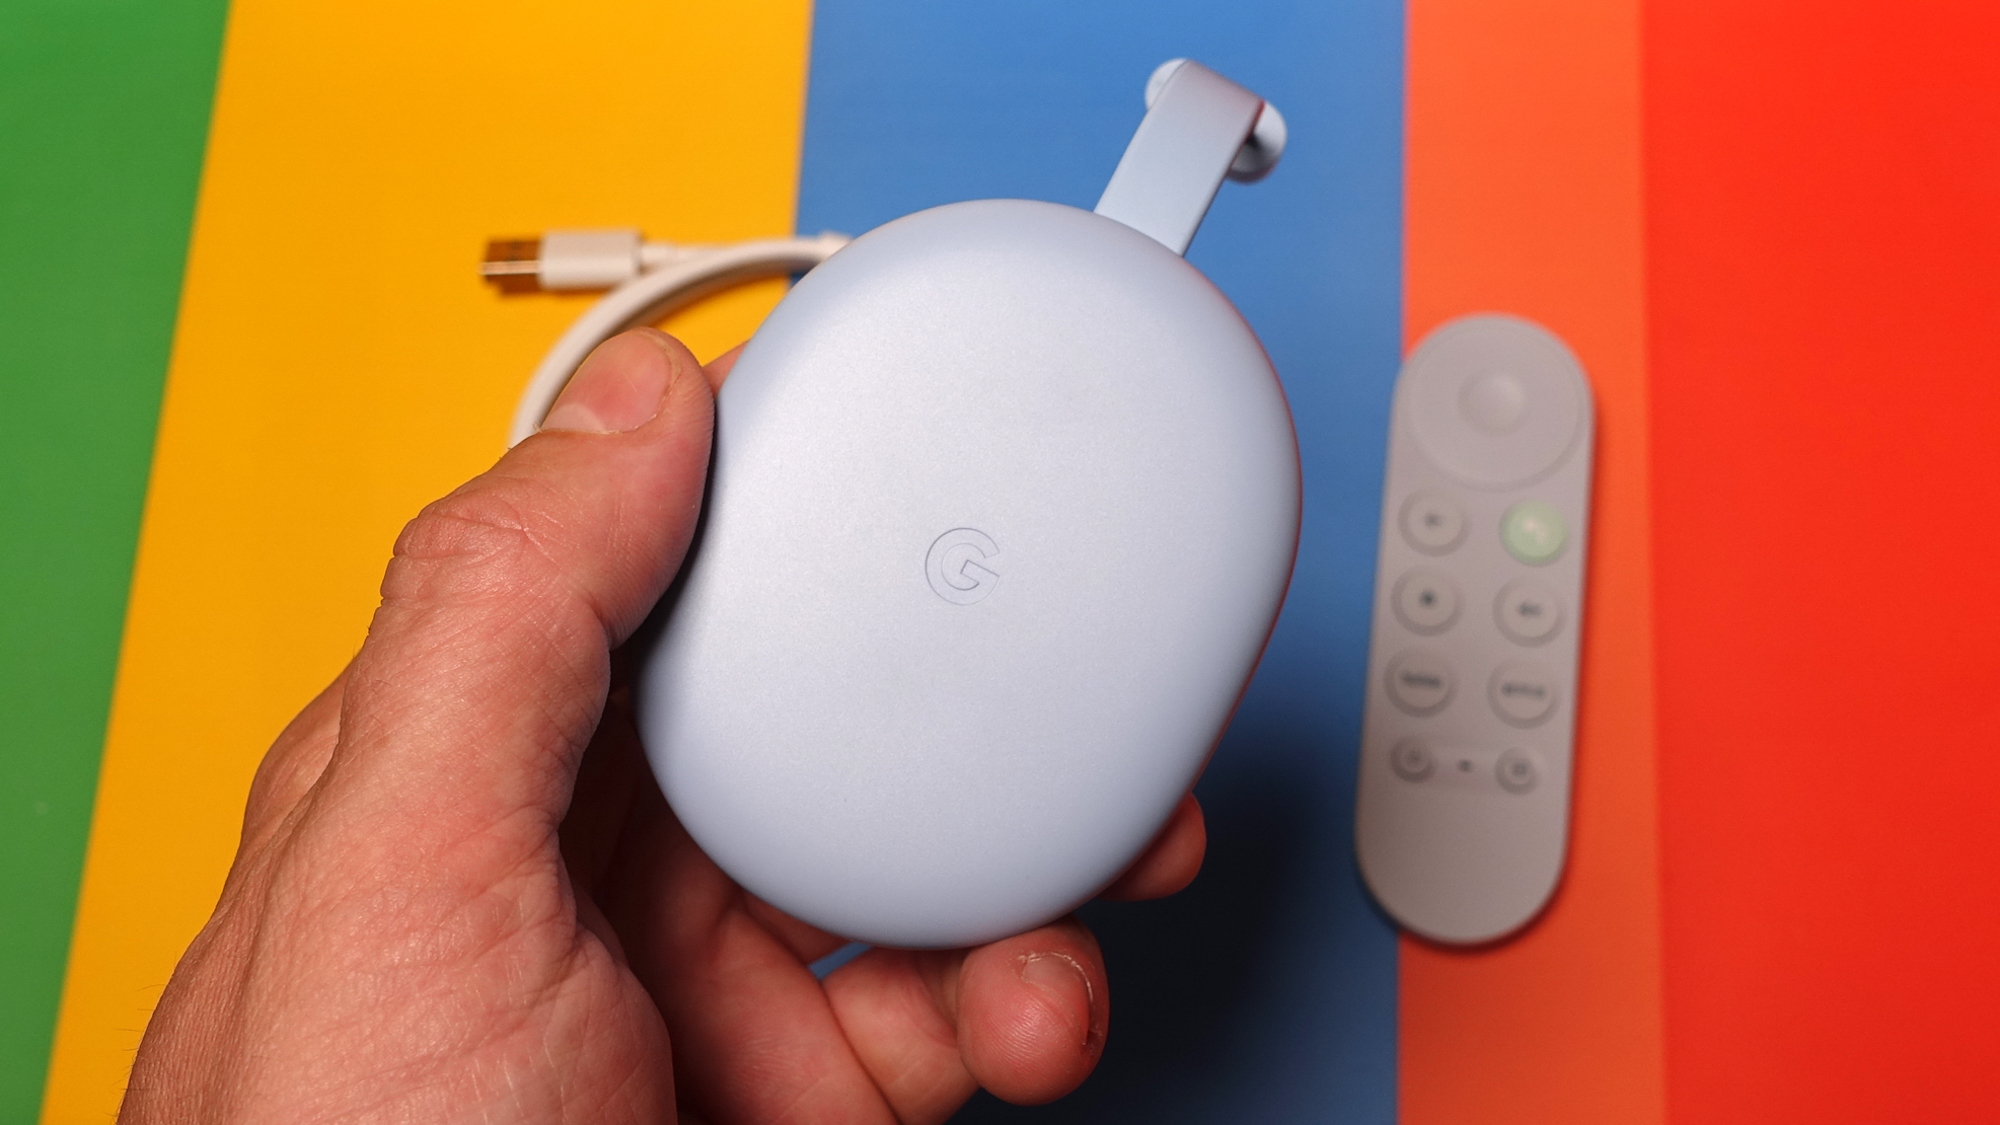 Chromecast with Google TV 4K in hand